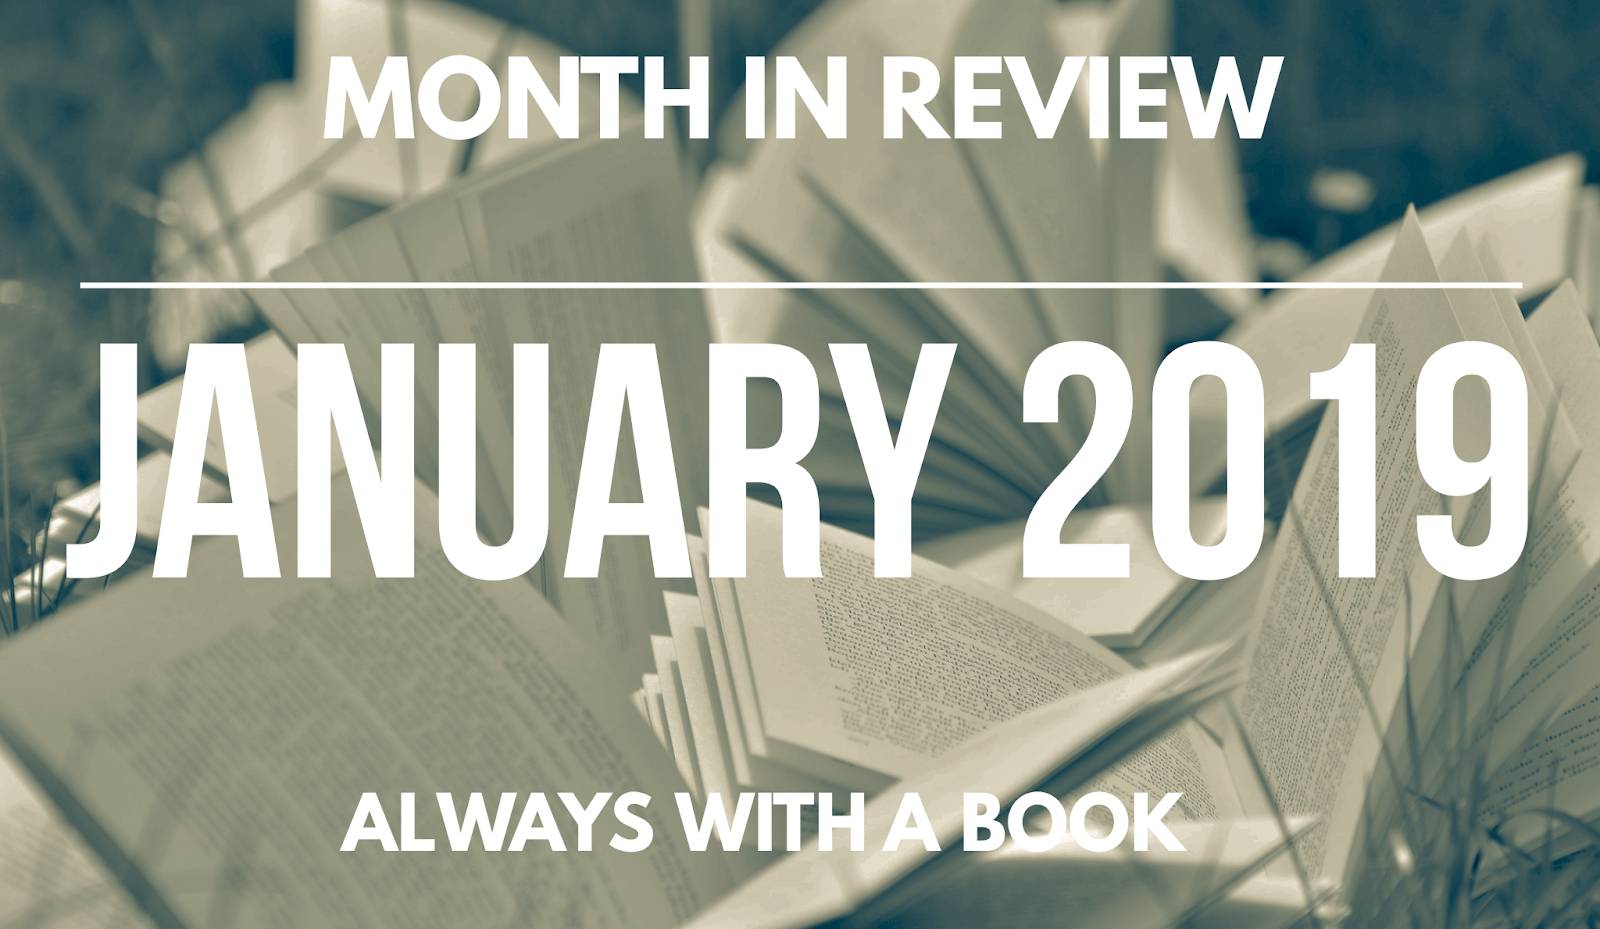 Month in Review: January 2019